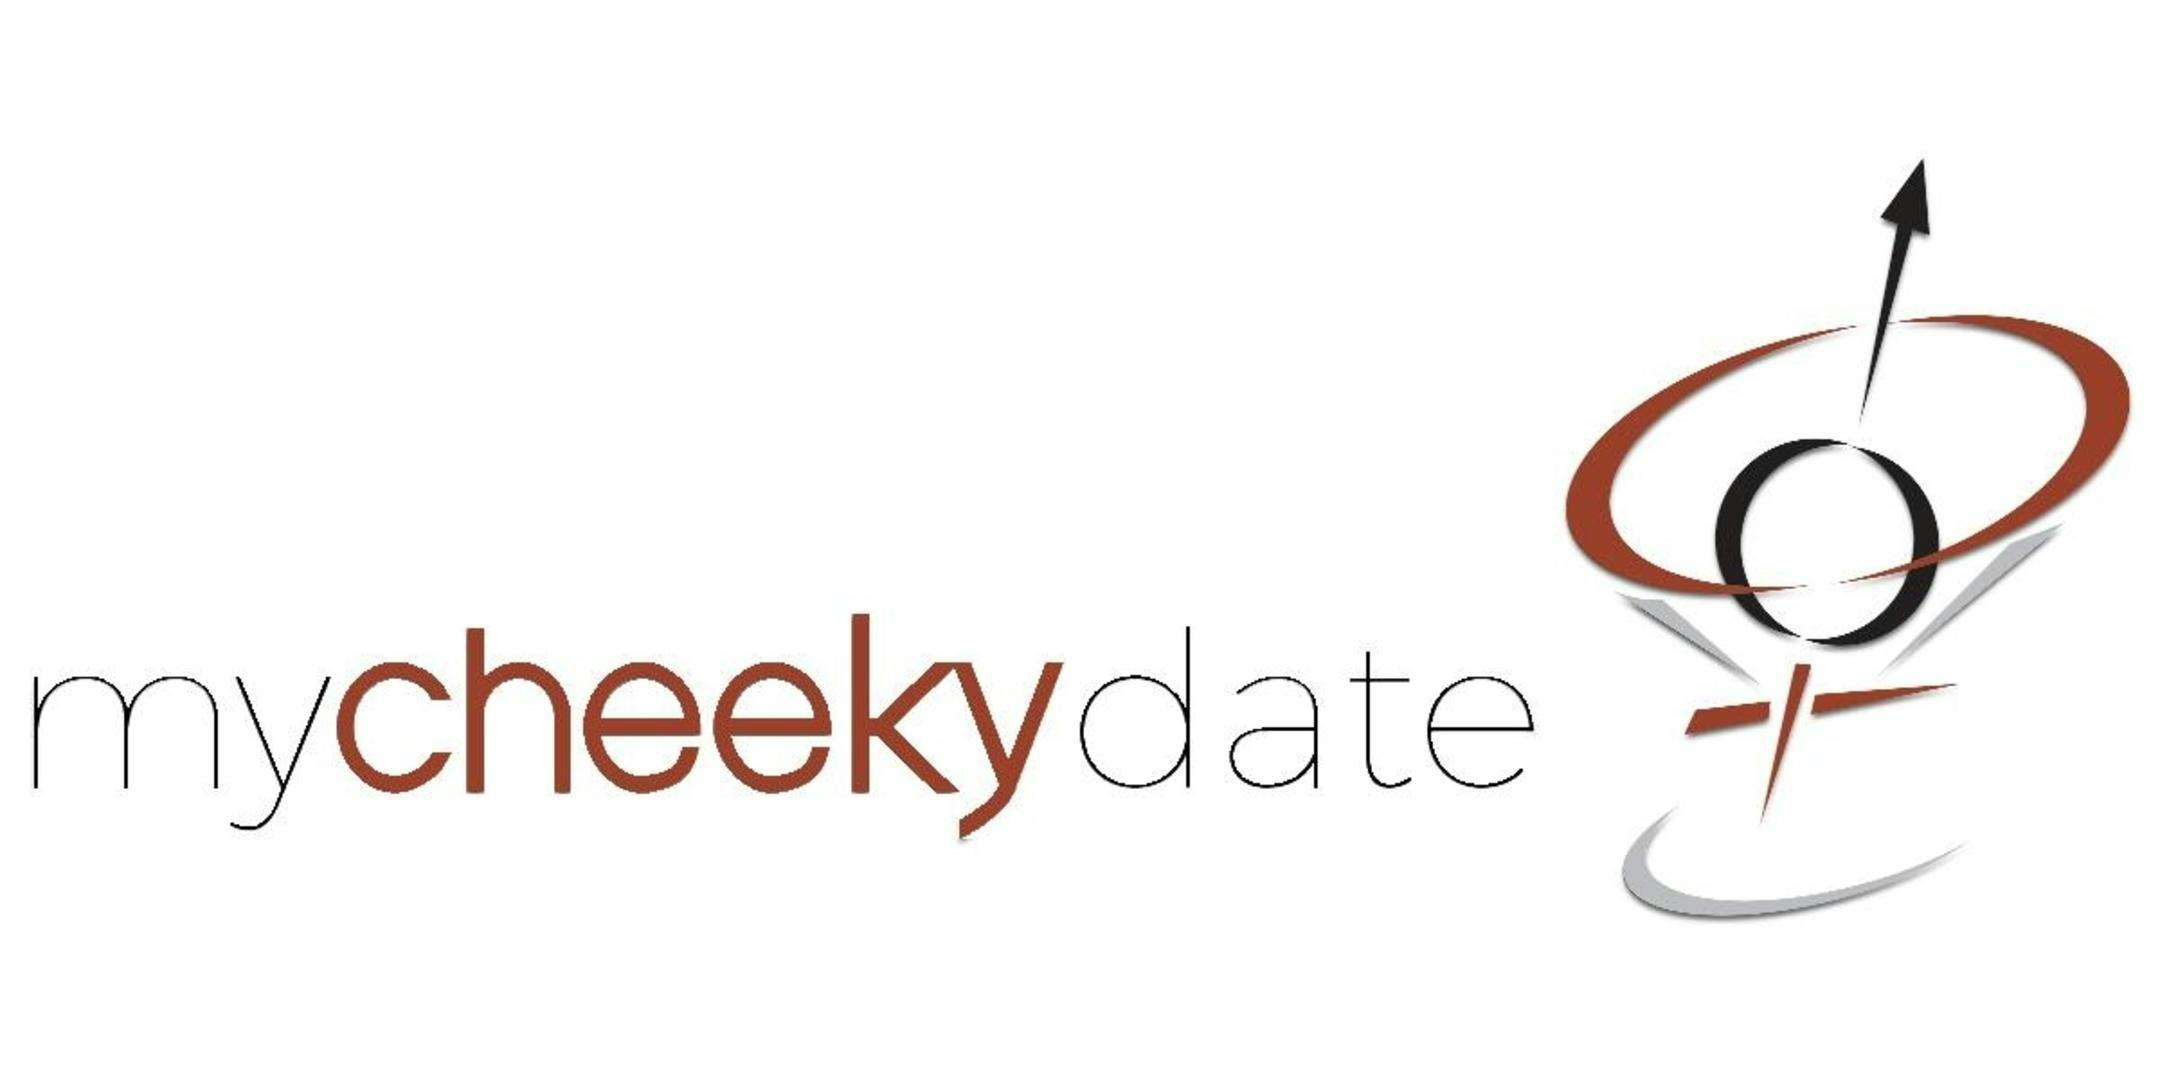 Speed Dating Event For Singles in Fort Worth Let's Get Cheeky! MyCheekyDate 